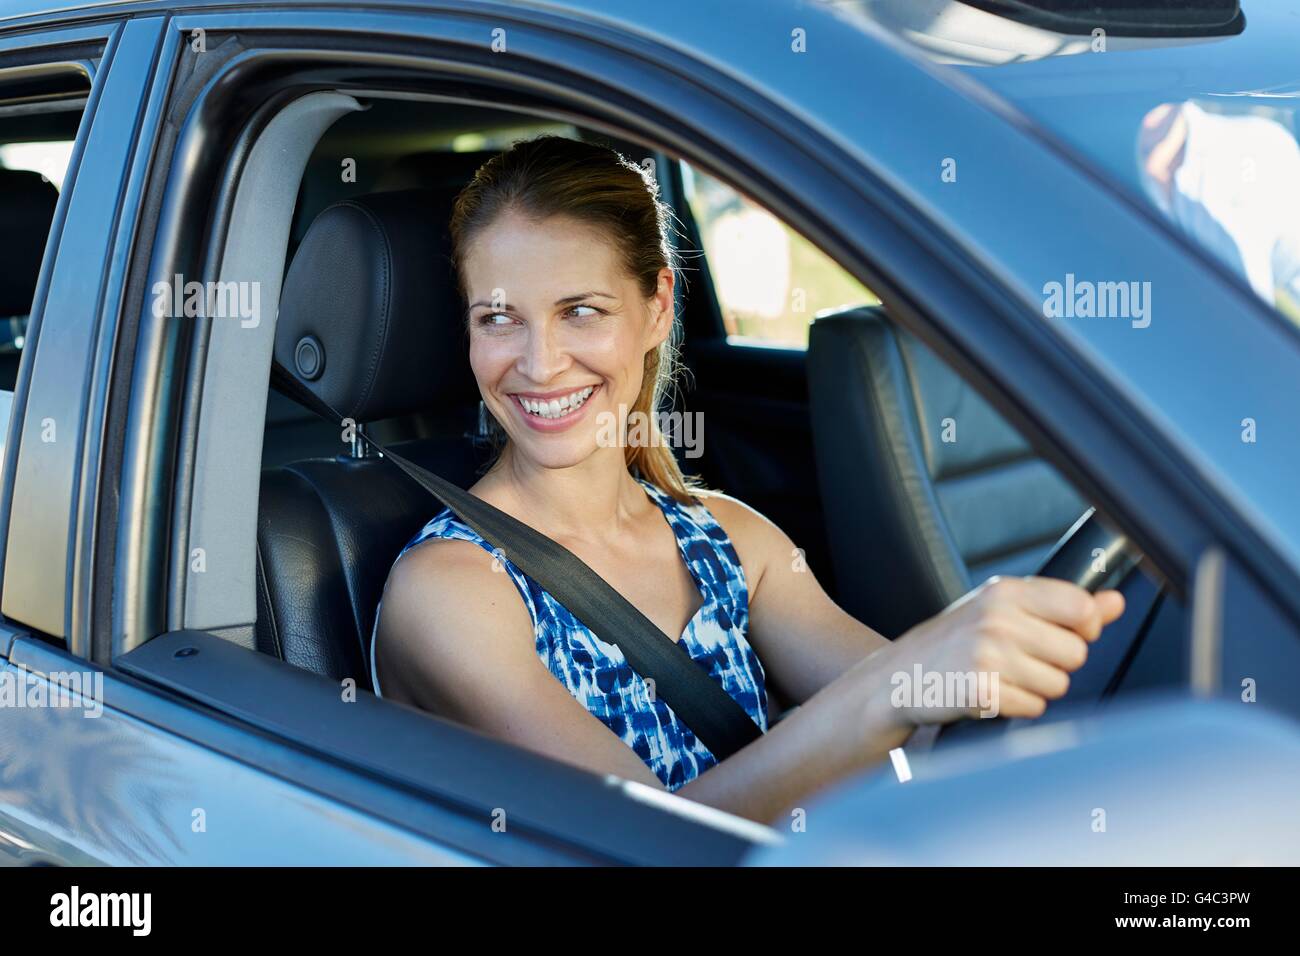 MODEL RELEASED. Young woman looking through car window, smiling. Stock Photo